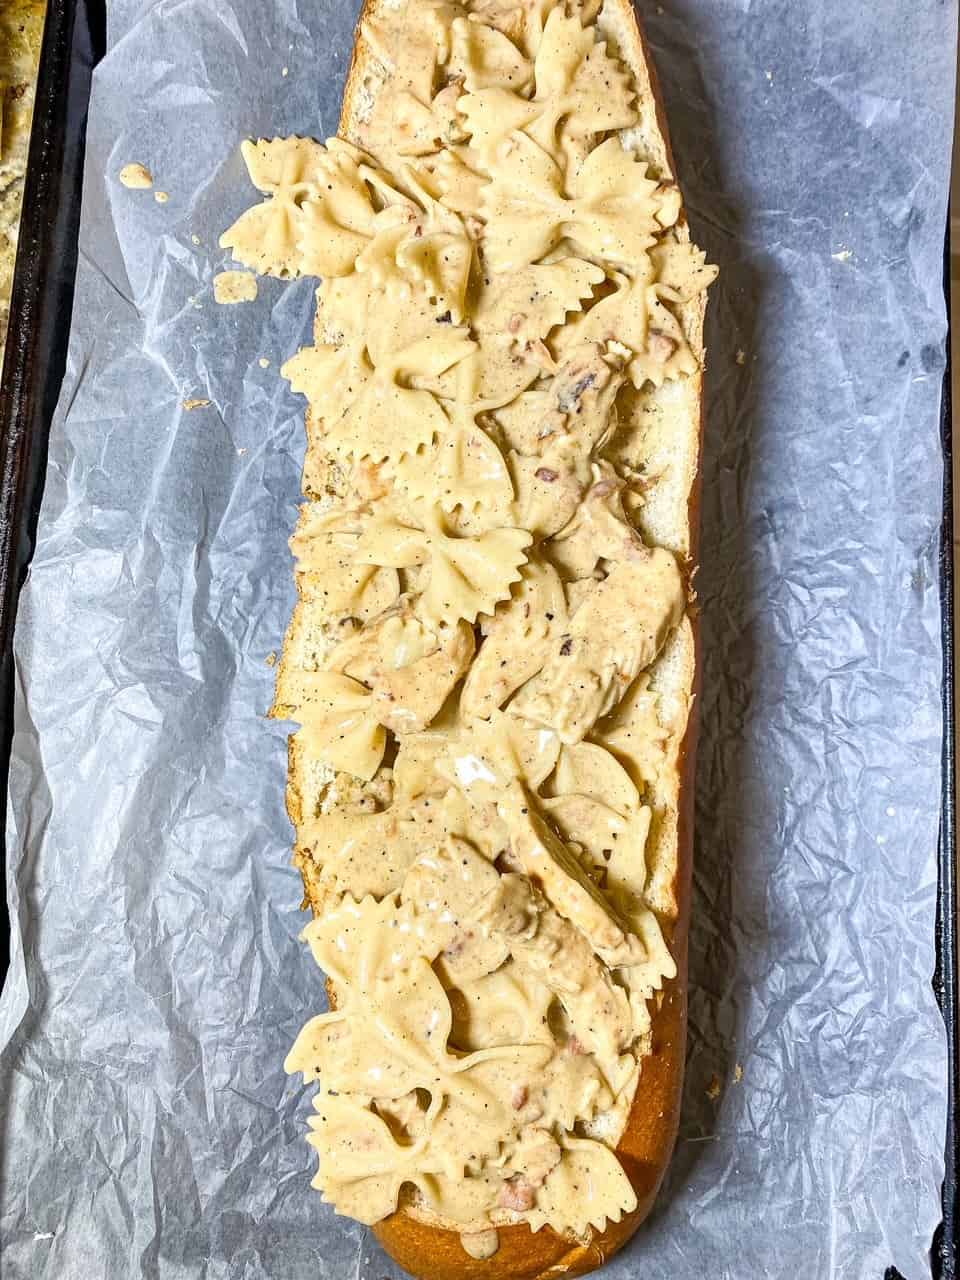 placed chicken alfredo into loaf of bread